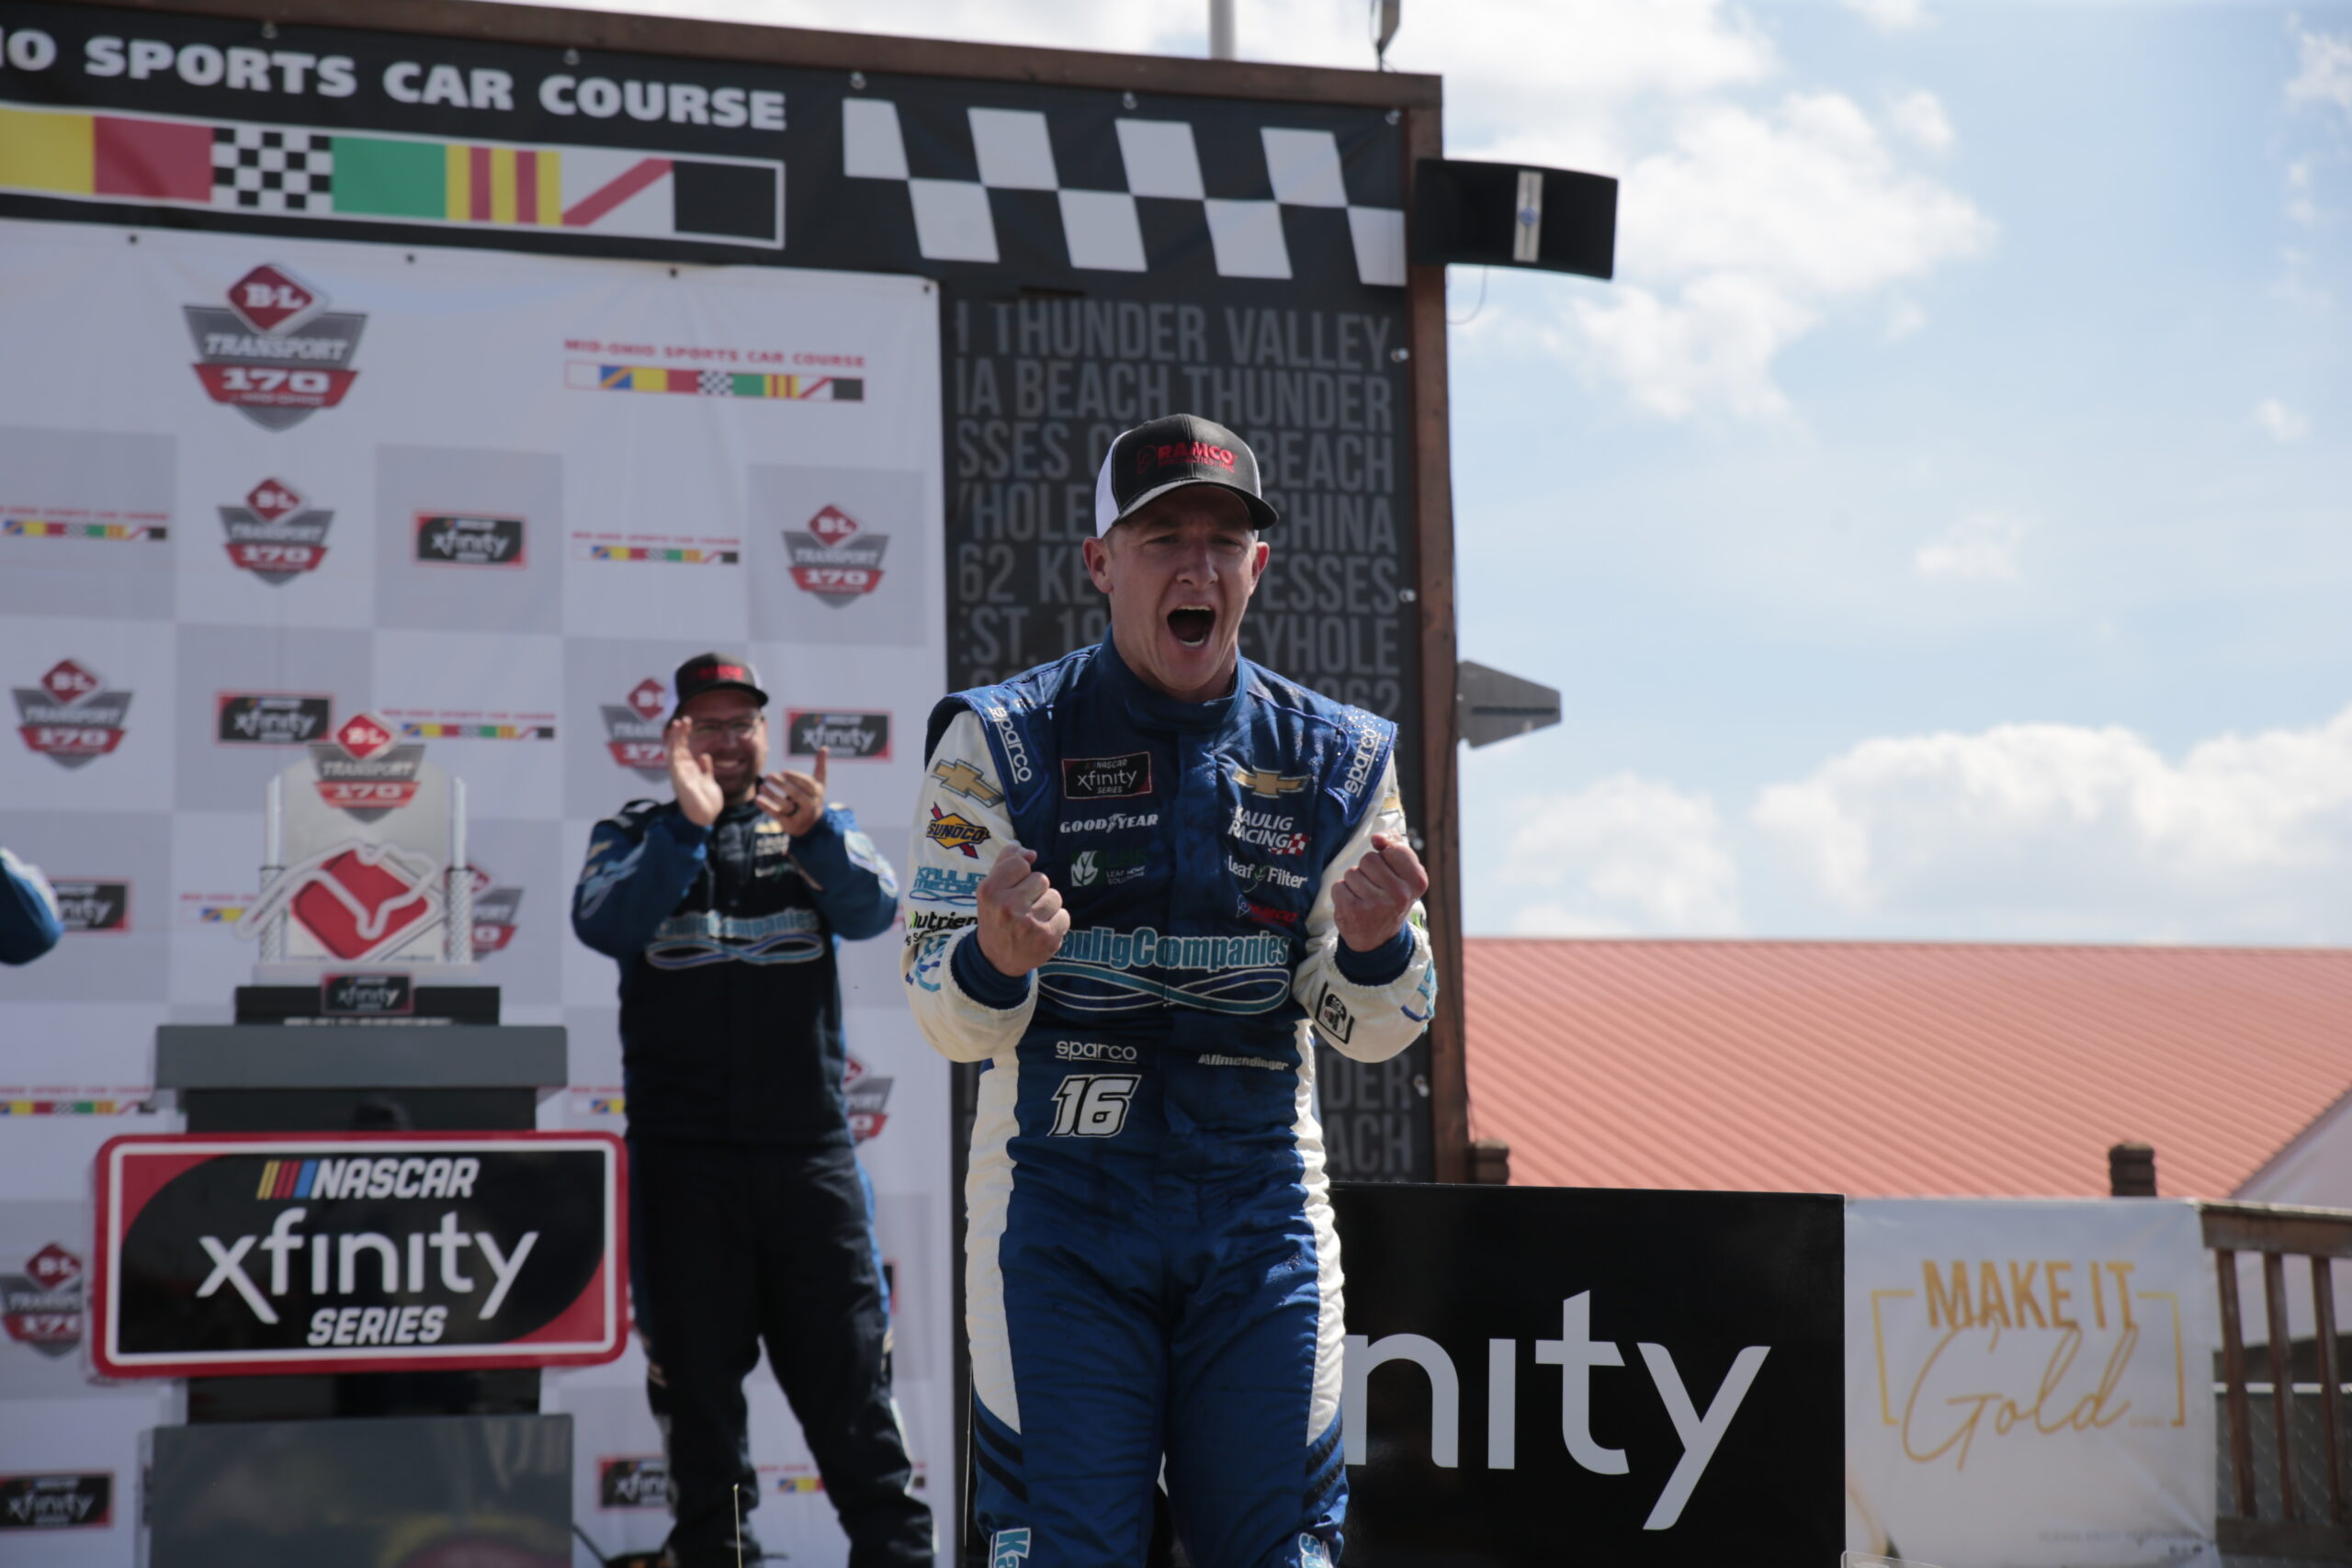 Ultimately, AJ Allmendinger expresses absolute confidence with contending for this year's XFINITY championship. (Photo: Stephen Conley/The Podium Finish)